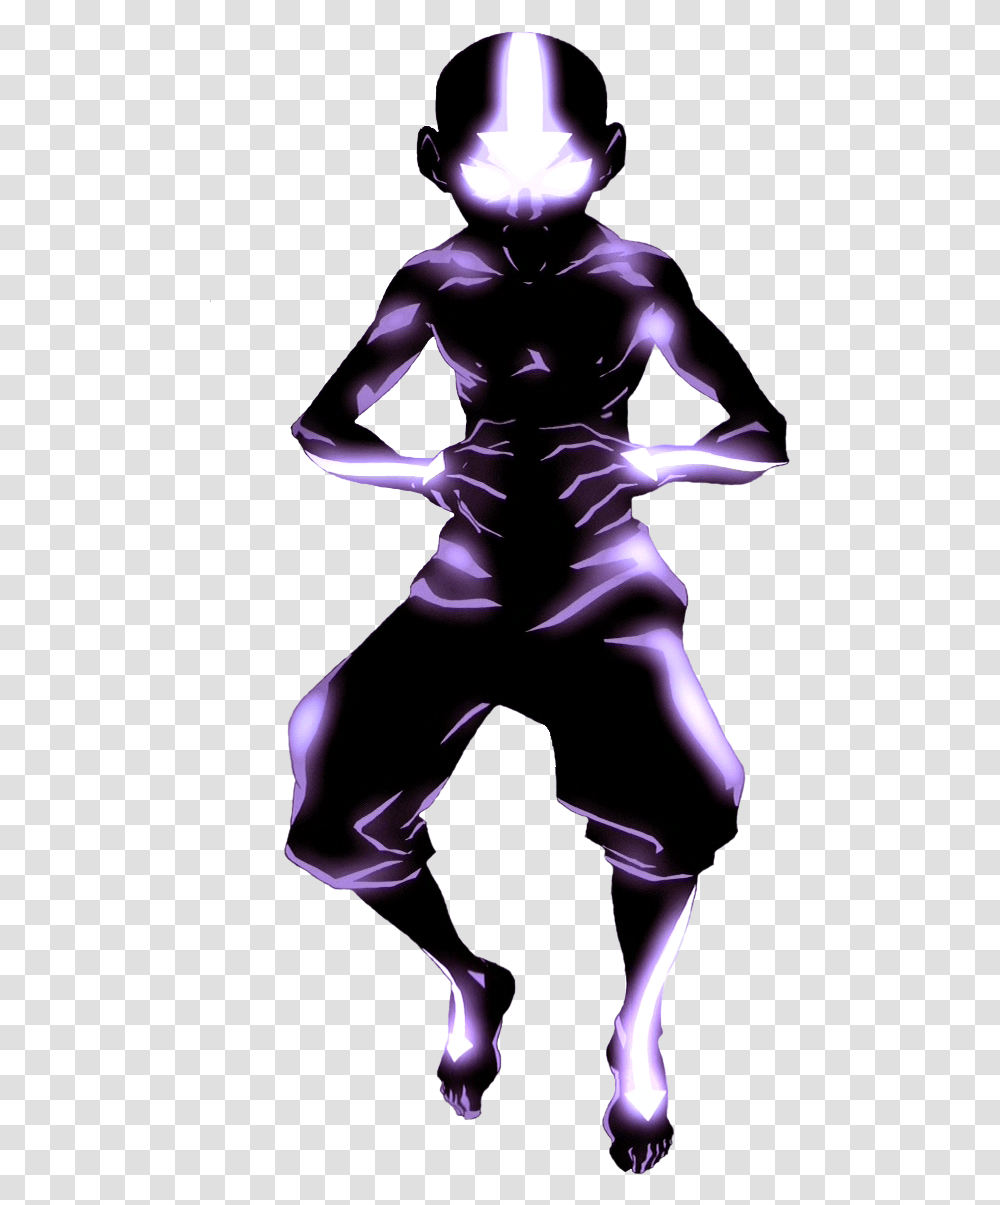 Avatar The Last Airbender Avatar The Last Airbender Aang Avatar State, Light, Purple, Leisure Activities, Dance Pose Transparent Png